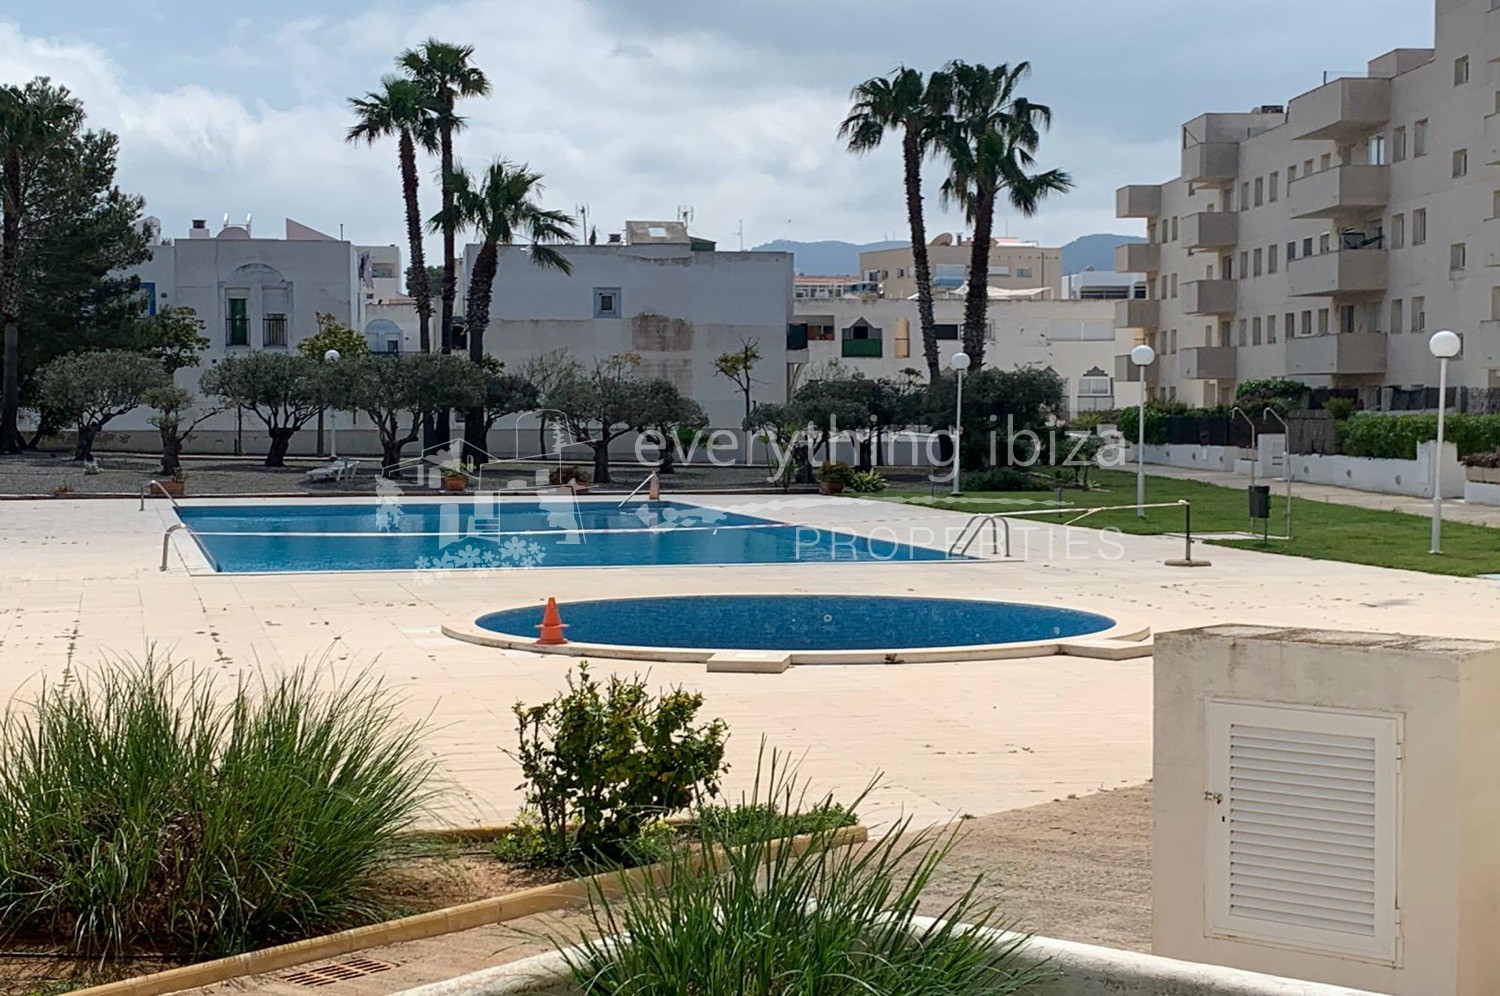 Ground floor frontline apartment for sale in Ibiza by everything ibiza properties